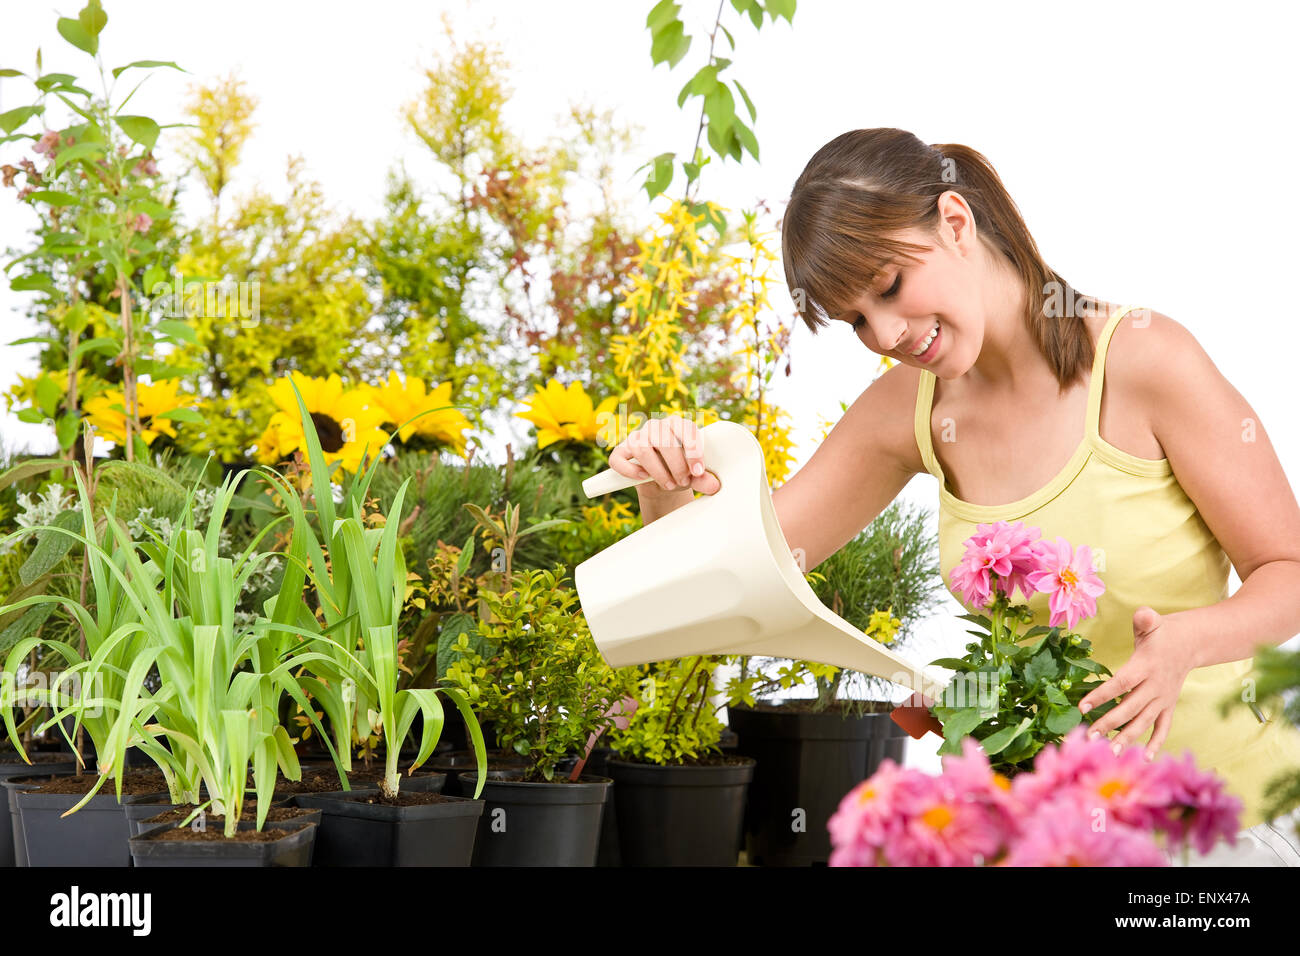 Gardening - woman with watering can and flowers pouring water Stock Photo